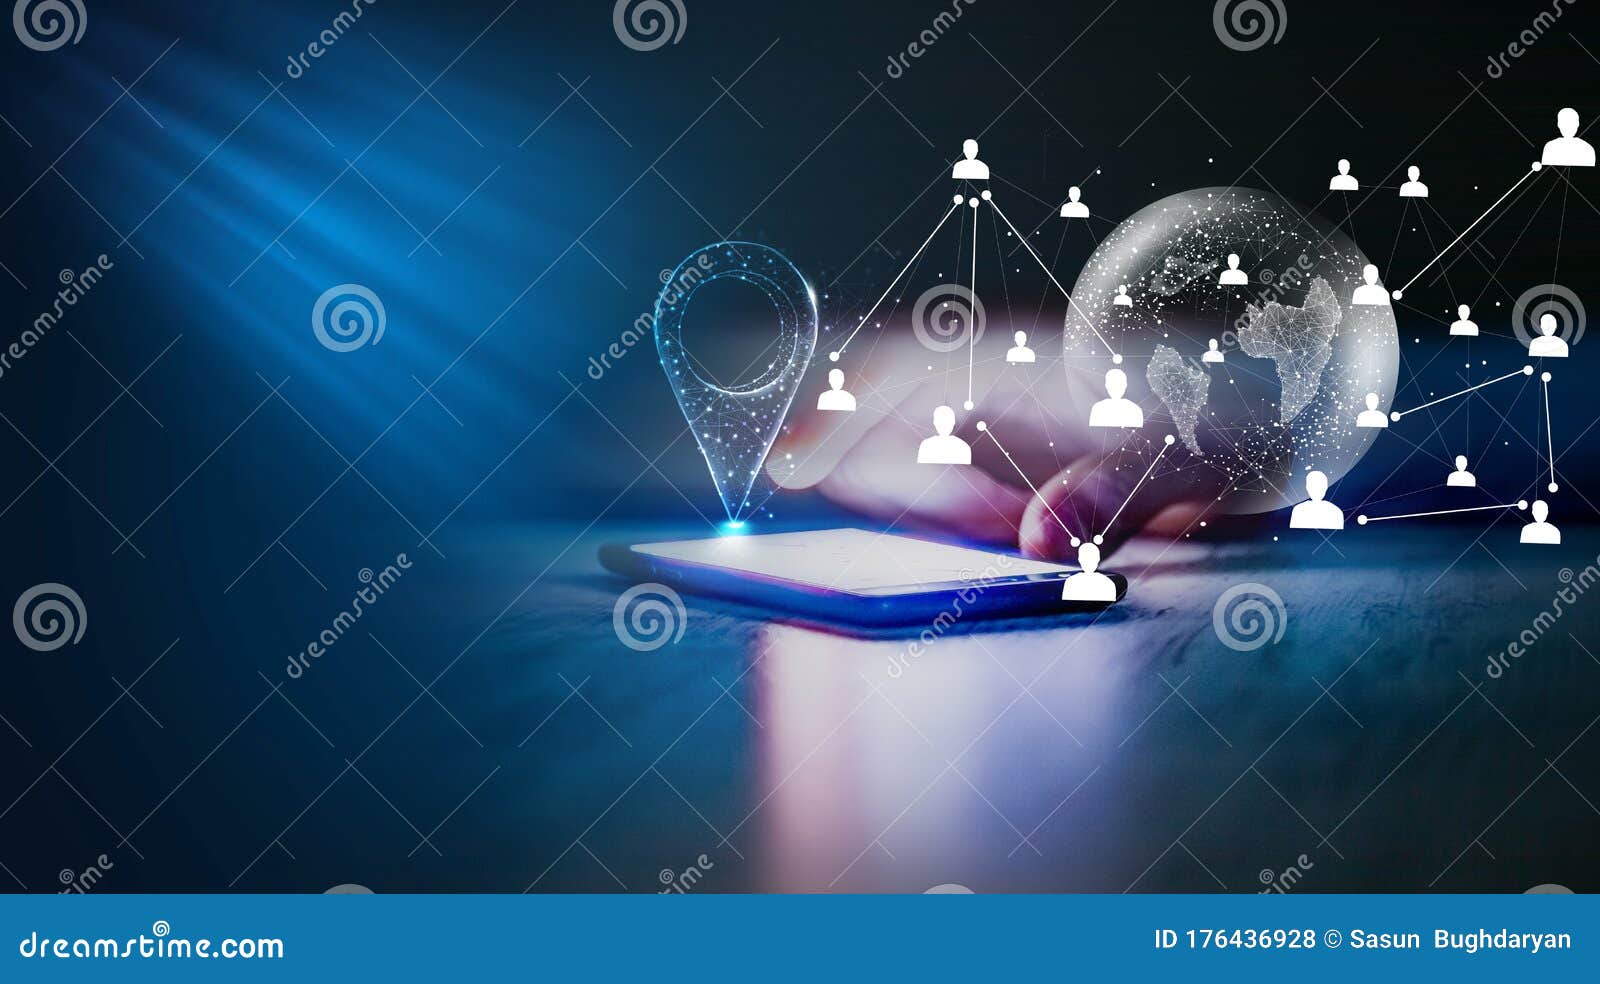 Search for Locations Around the World. Location Map Concept Stock Photo